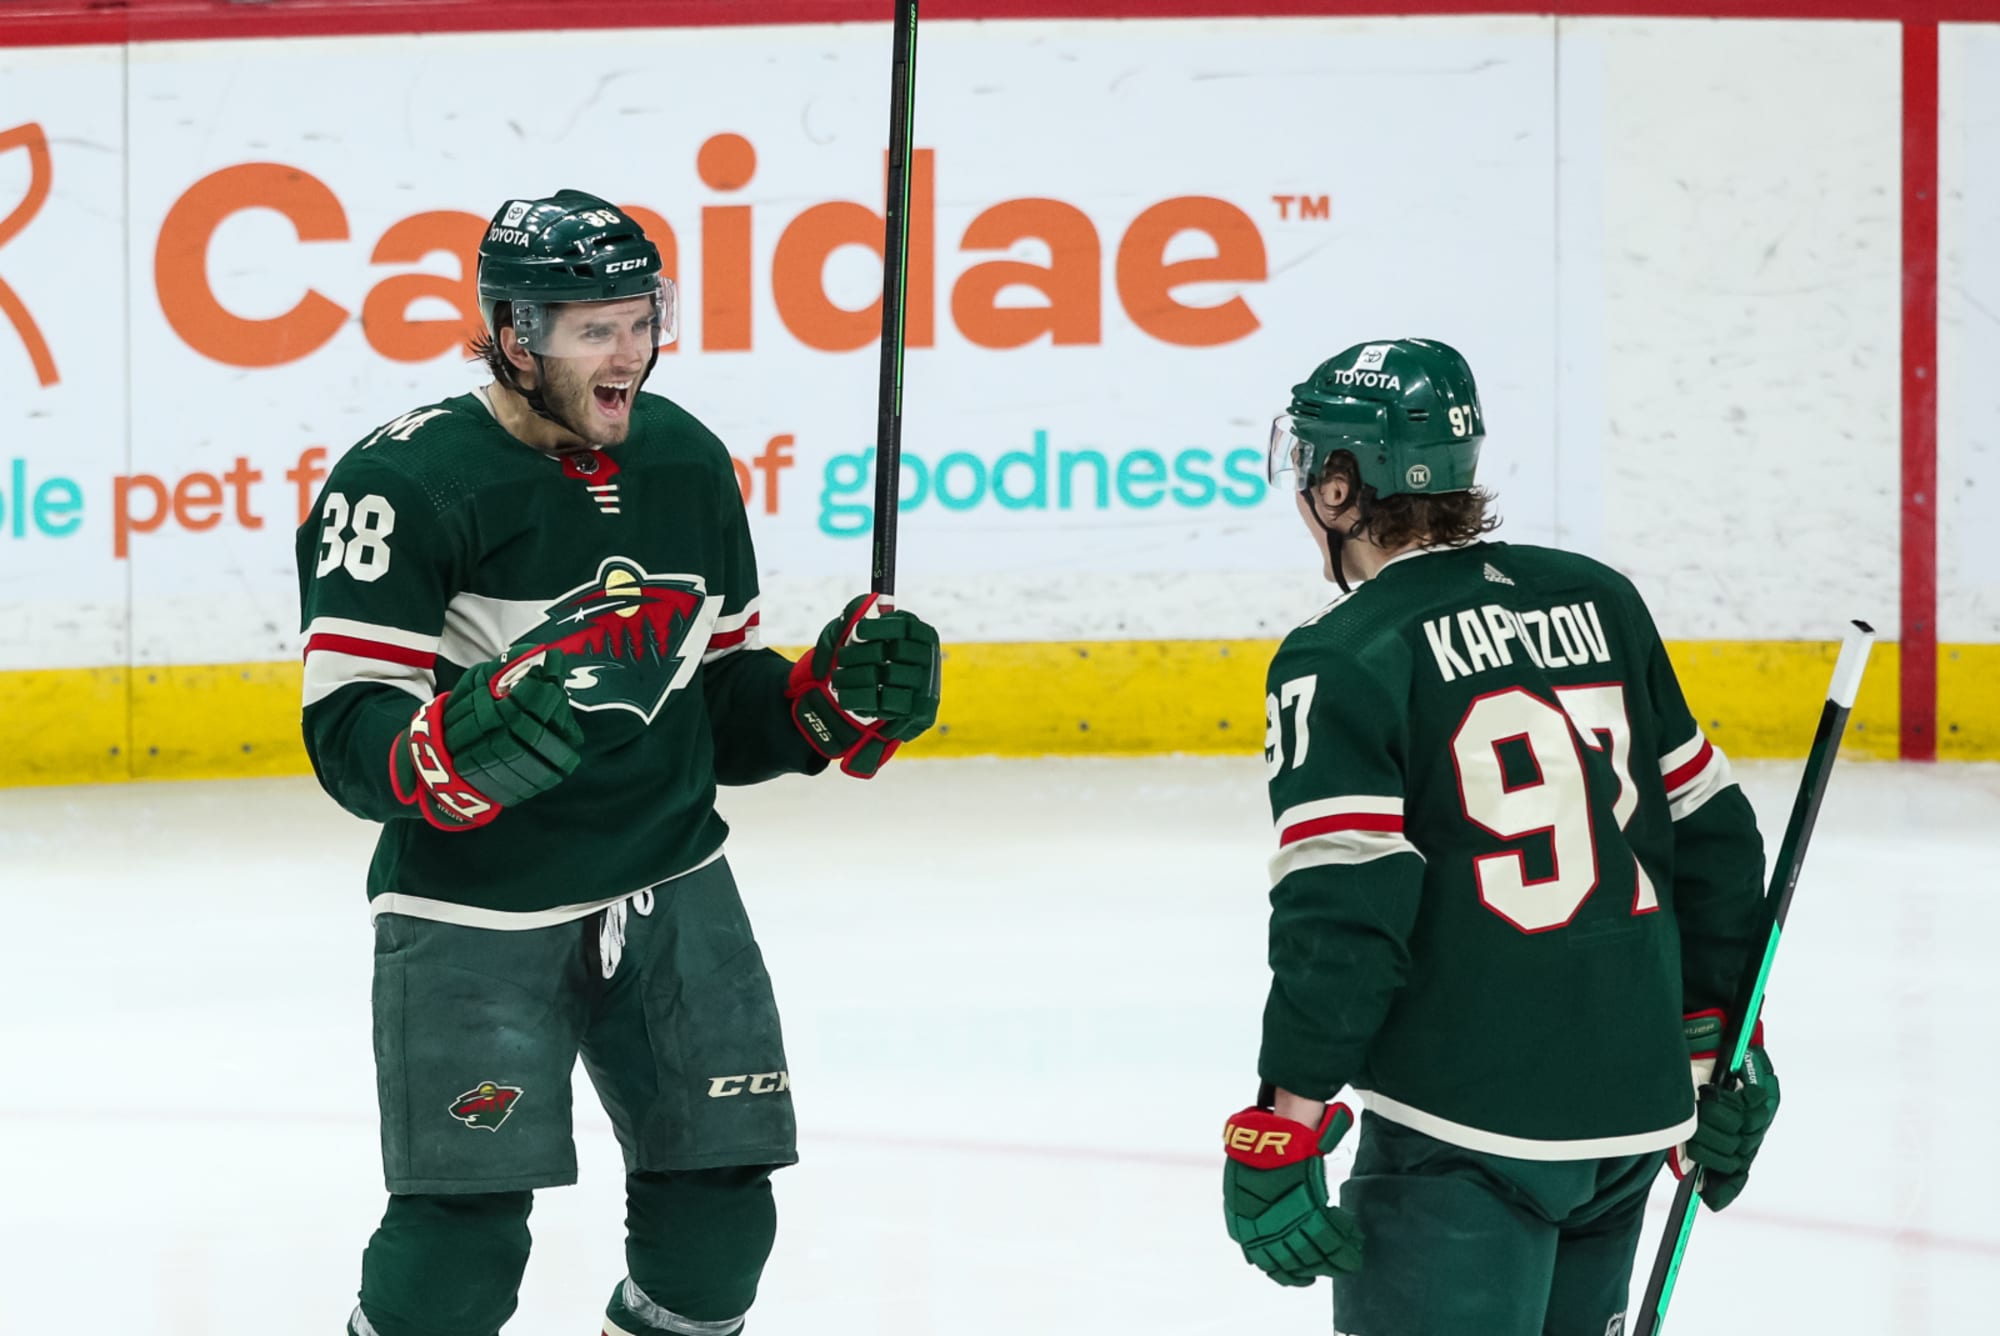 Road to the Cup: Marcus Foligno savouring Wild's playoff run